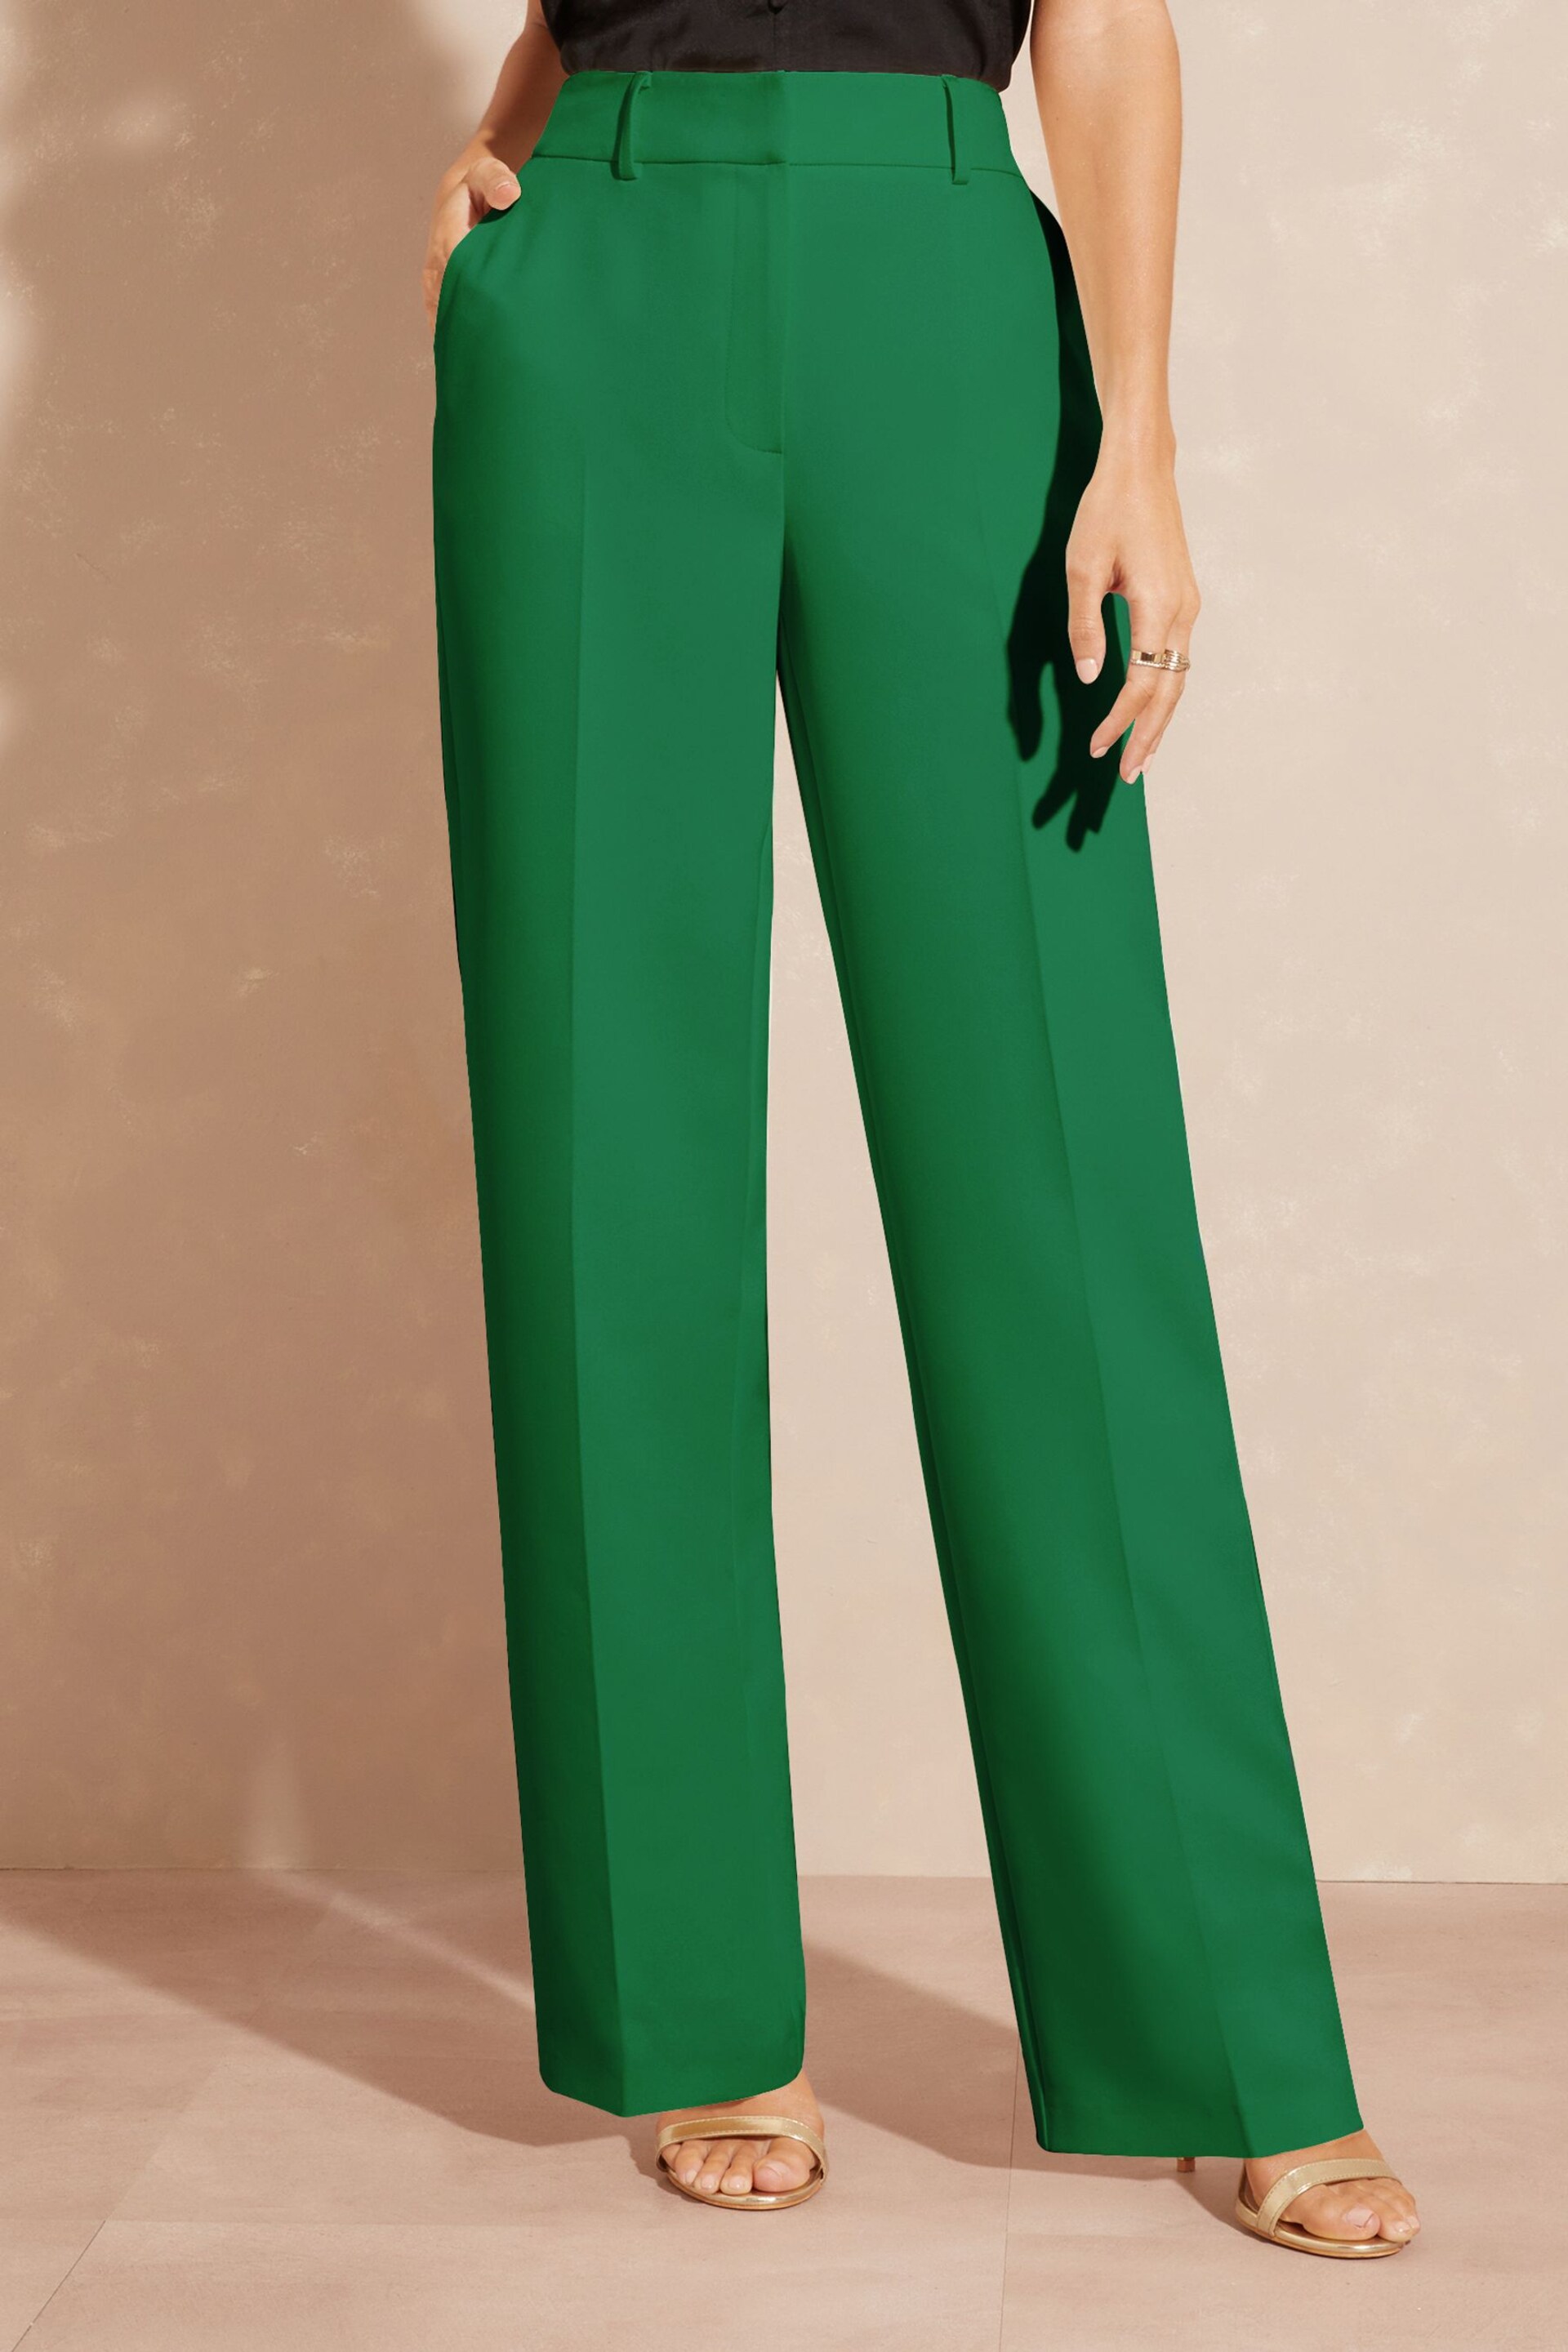 Love & Roses Green High Waist Wide Leg Tailored Trousers - Image 1 of 4